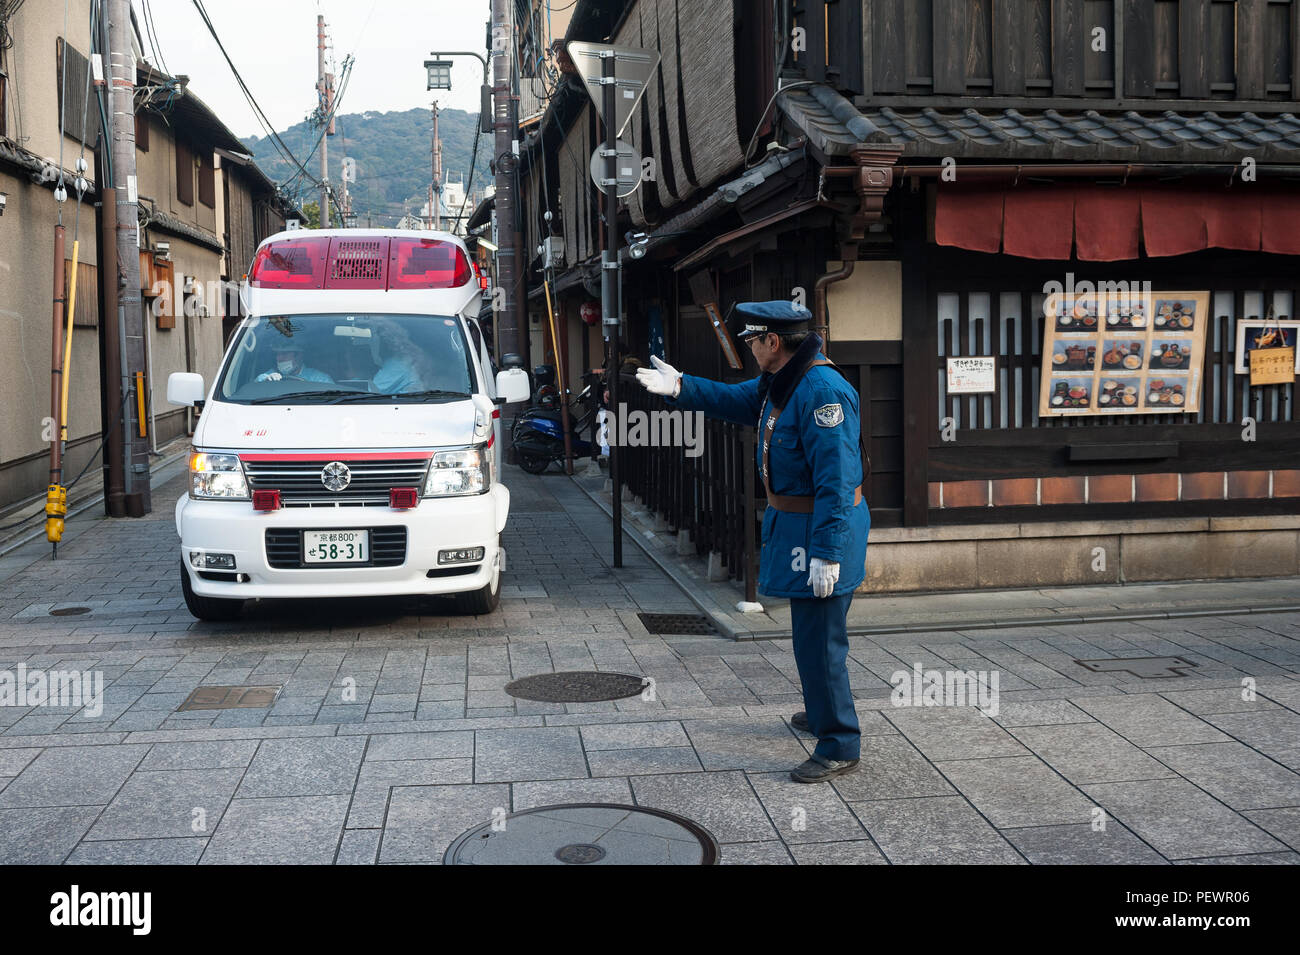 23.12.2017, Kyoto, Japan, Asia - A traffic warden is seen regulating the flow of traffic at an intersection in Kyoto's old city. Stock Photo